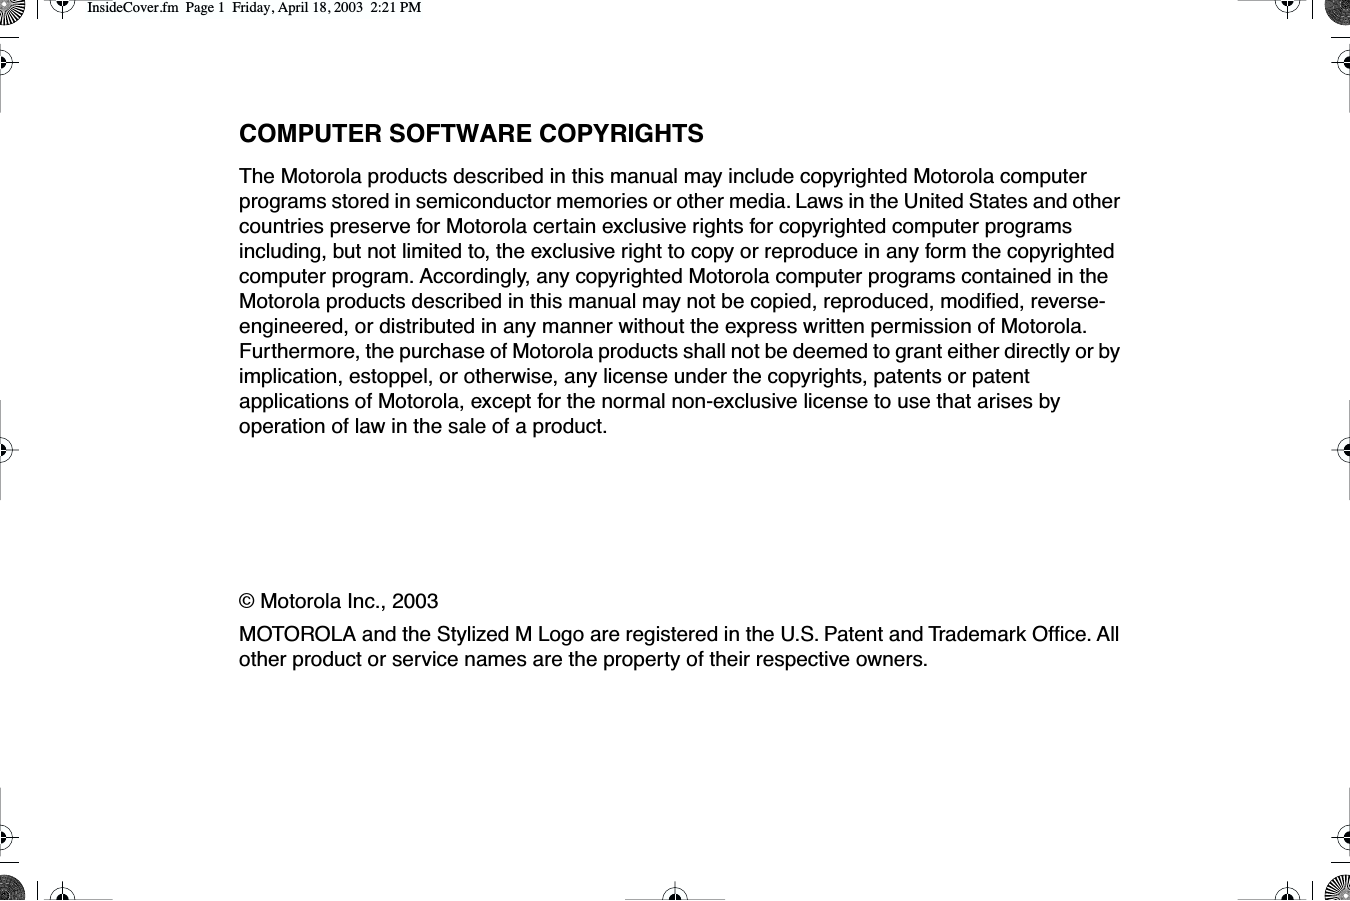  COMPUTER SOFTWARE COPYRIGHTS The Motorola products described in this manual may include copyrighted Motorola computer programs stored in semiconductor memories or other media. Laws in the United States and other countries preserve for Motorola certain exclusive rights for copyrighted computer programs including, but not limited to, the exclusive right to copy or reproduce in any form the copyrighted computer program. Accordingly, any copyrighted Motorola computer programs contained in the Motorola products described in this manual may not be copied, reproduced, modiﬁed, reverse-engineered, or distributed in any manner without the express written permission of Motorola. Furthermore, the purchase of Motorola products shall not be deemed to grant either directly or by implication, estoppel, or otherwise, any license under the copyrights, patents or patent applications of Motorola, except for the normal non-exclusive license to use that arises by operation of law in the sale of a product.© Motorola Inc., 2003MOTOROLA and the Stylized M Logo are registered in the U.S. Patent and Trademark Ofﬁce. All other product or service names are the property of their respective owners. InsideCover.fm  Page 1  Friday, April 18, 2003  2:21 PM